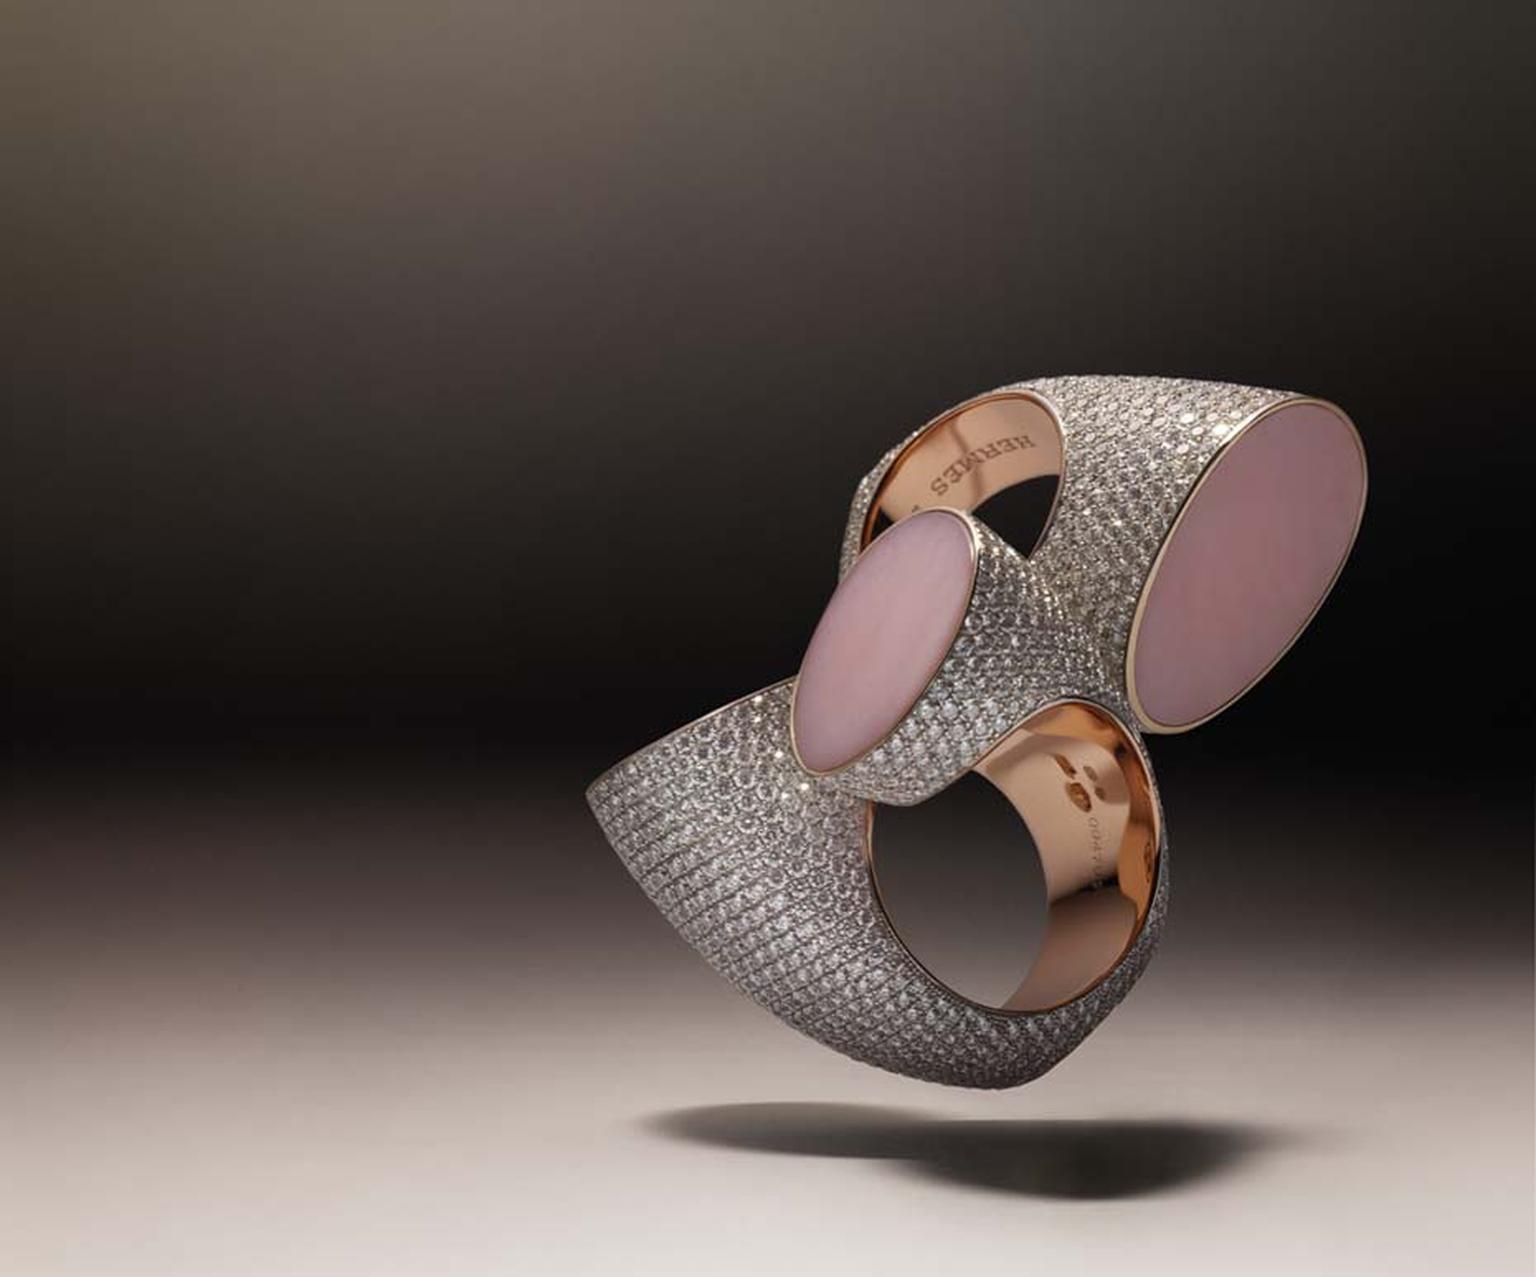 Hermès Centaure double ring in rose and white gold with diamonds and pink opal.